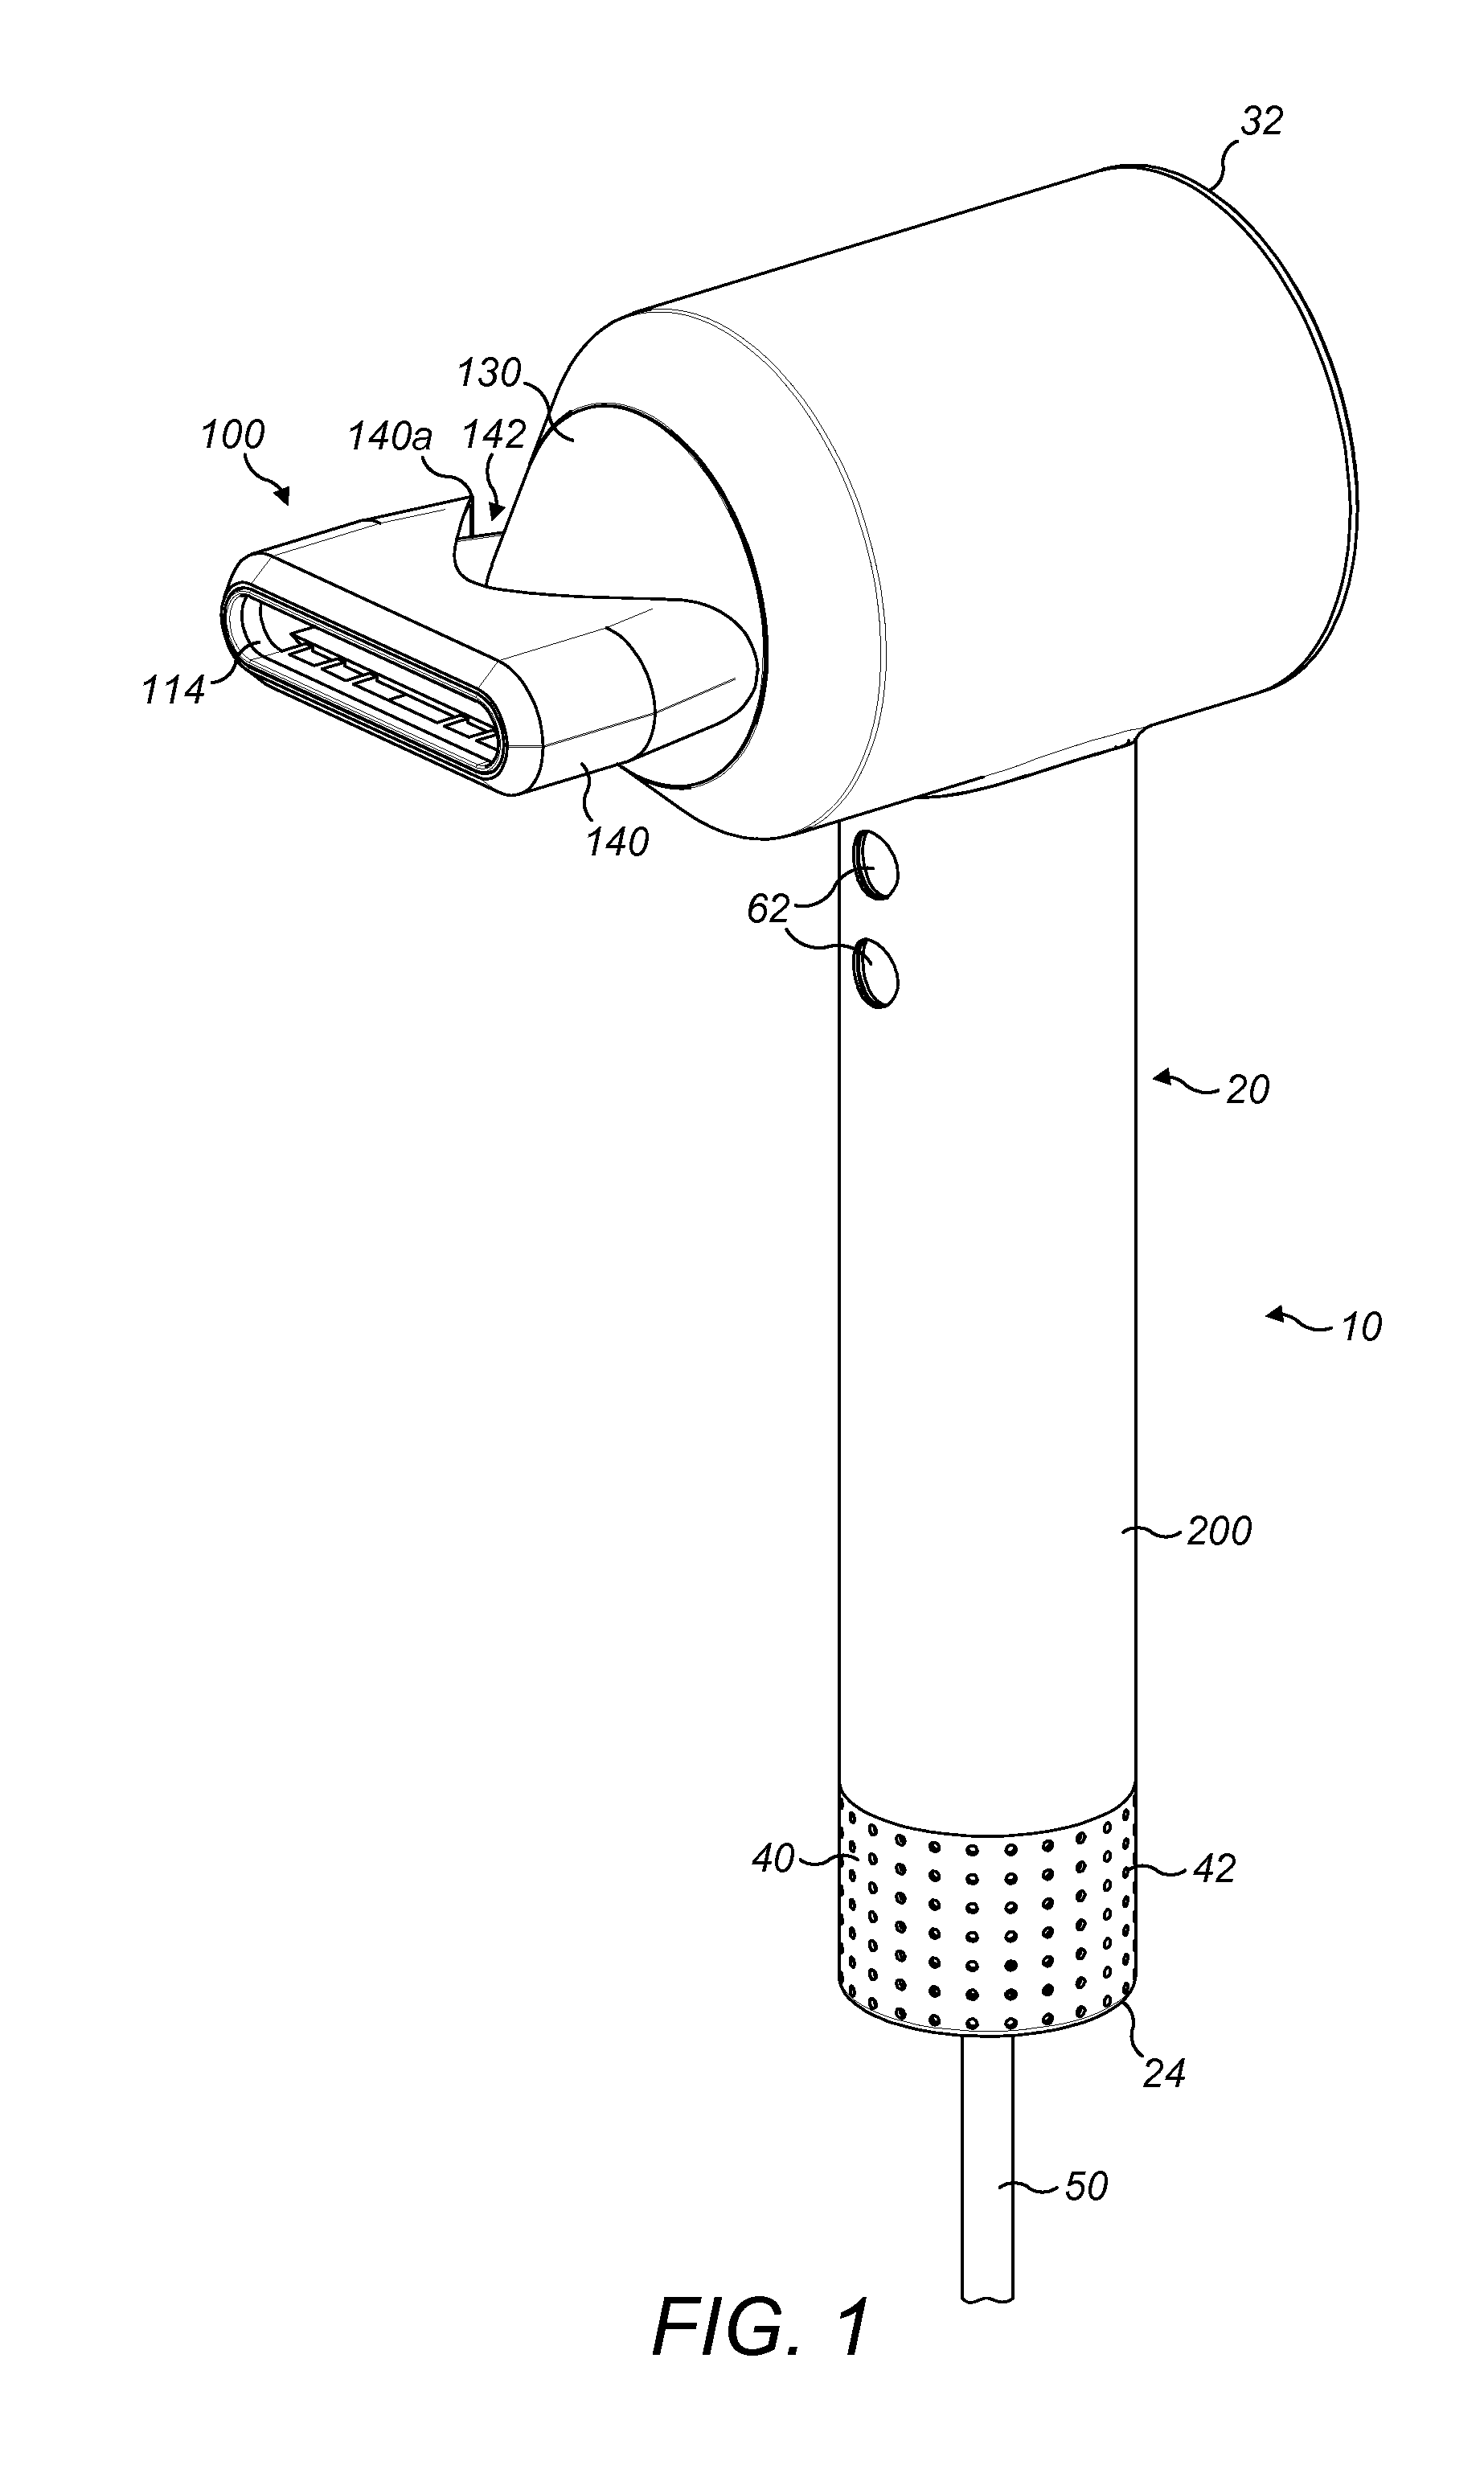 Attachment for a handheld appliance